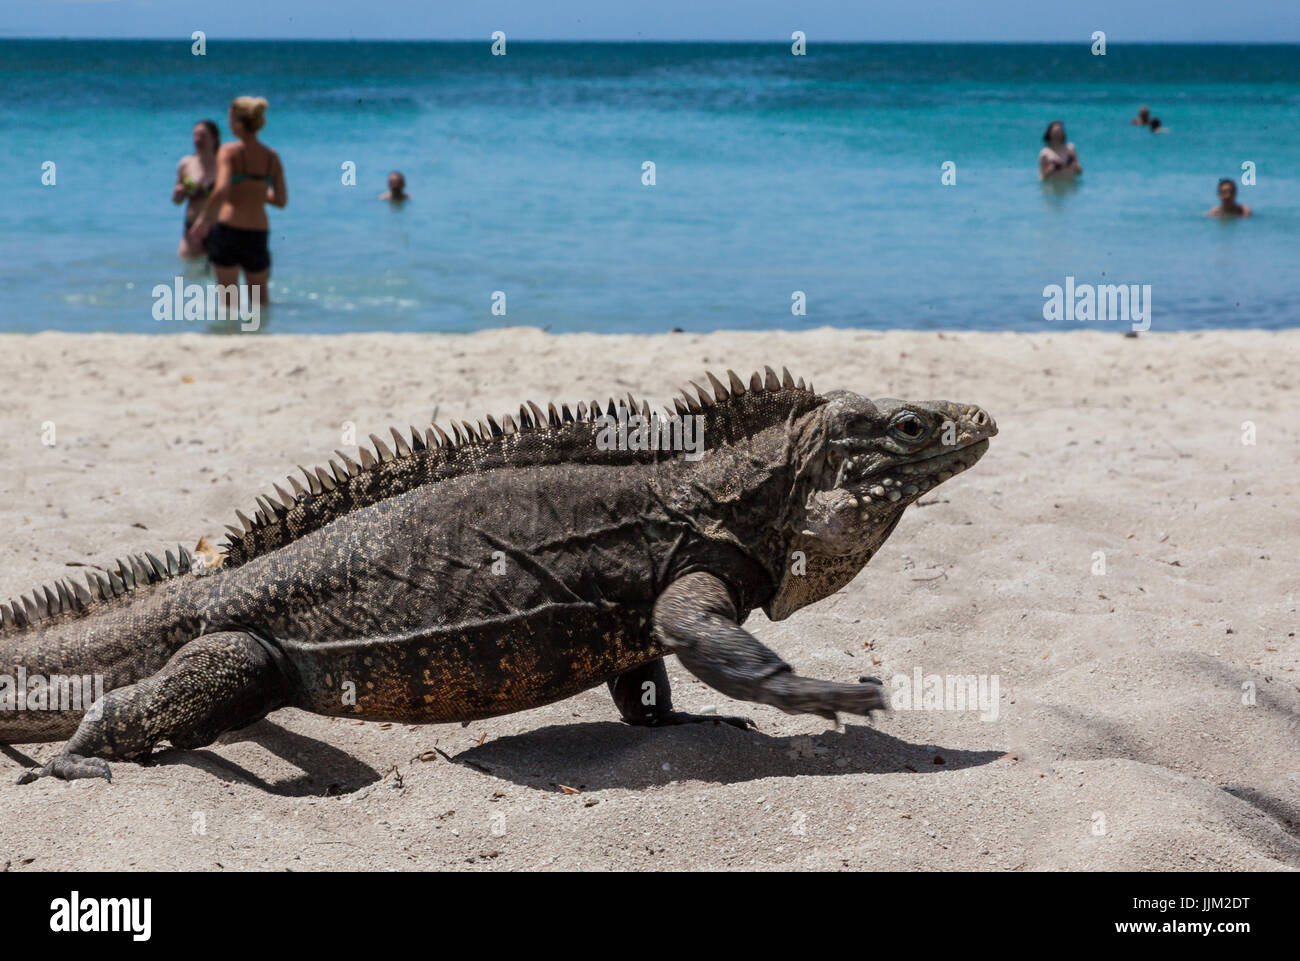 The tropical island of CAYO IGUANA reached by boat from PLAYA ANCON is a tourist destination - TRINIDAD, CUBA Stock Photo